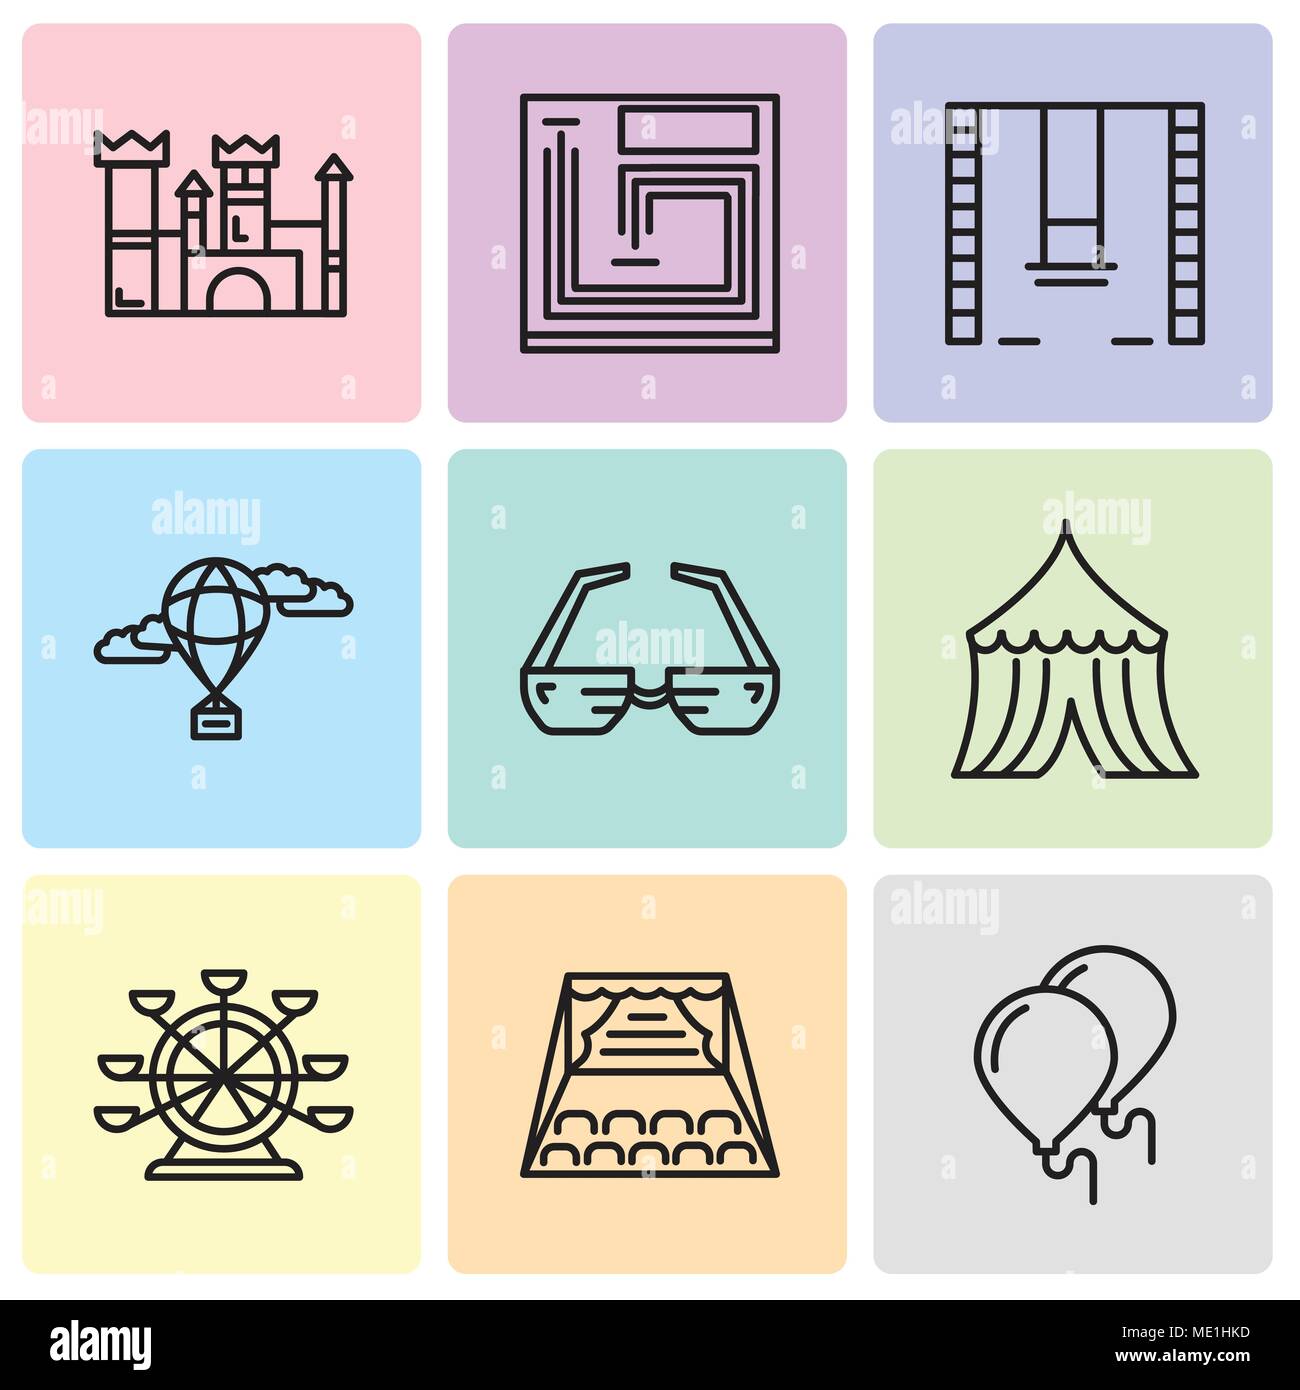 Set Of 9 simple editable icons such as Balloons, Stage, Ferris wheel, Tent, 3d glasses, Hot air balloon, Swings, Board game, Castle, can be used for m Stock Vector